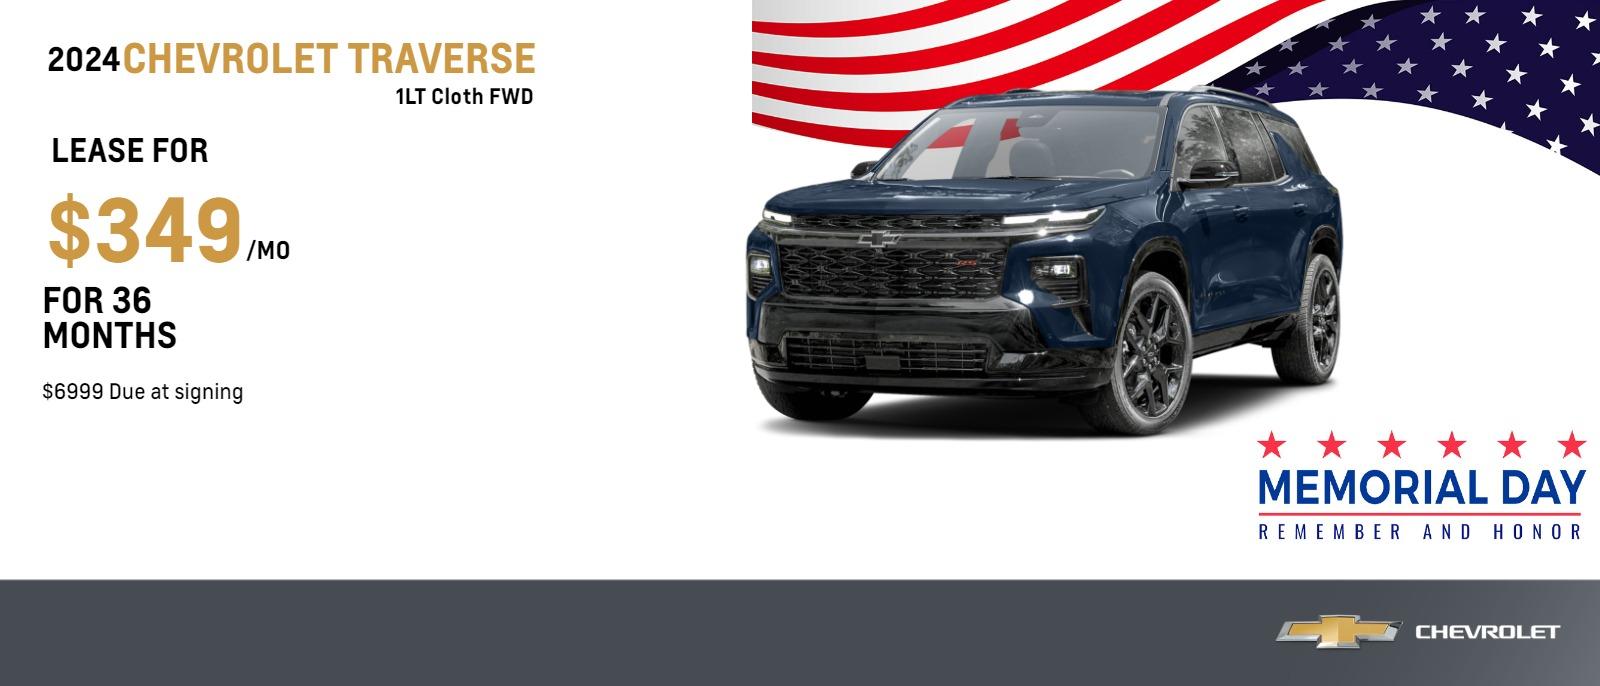 2023 Chevrolet Traverse 1LT Cloth FWD
$349 Month Lease | 36 Months | $6999 Due at signing